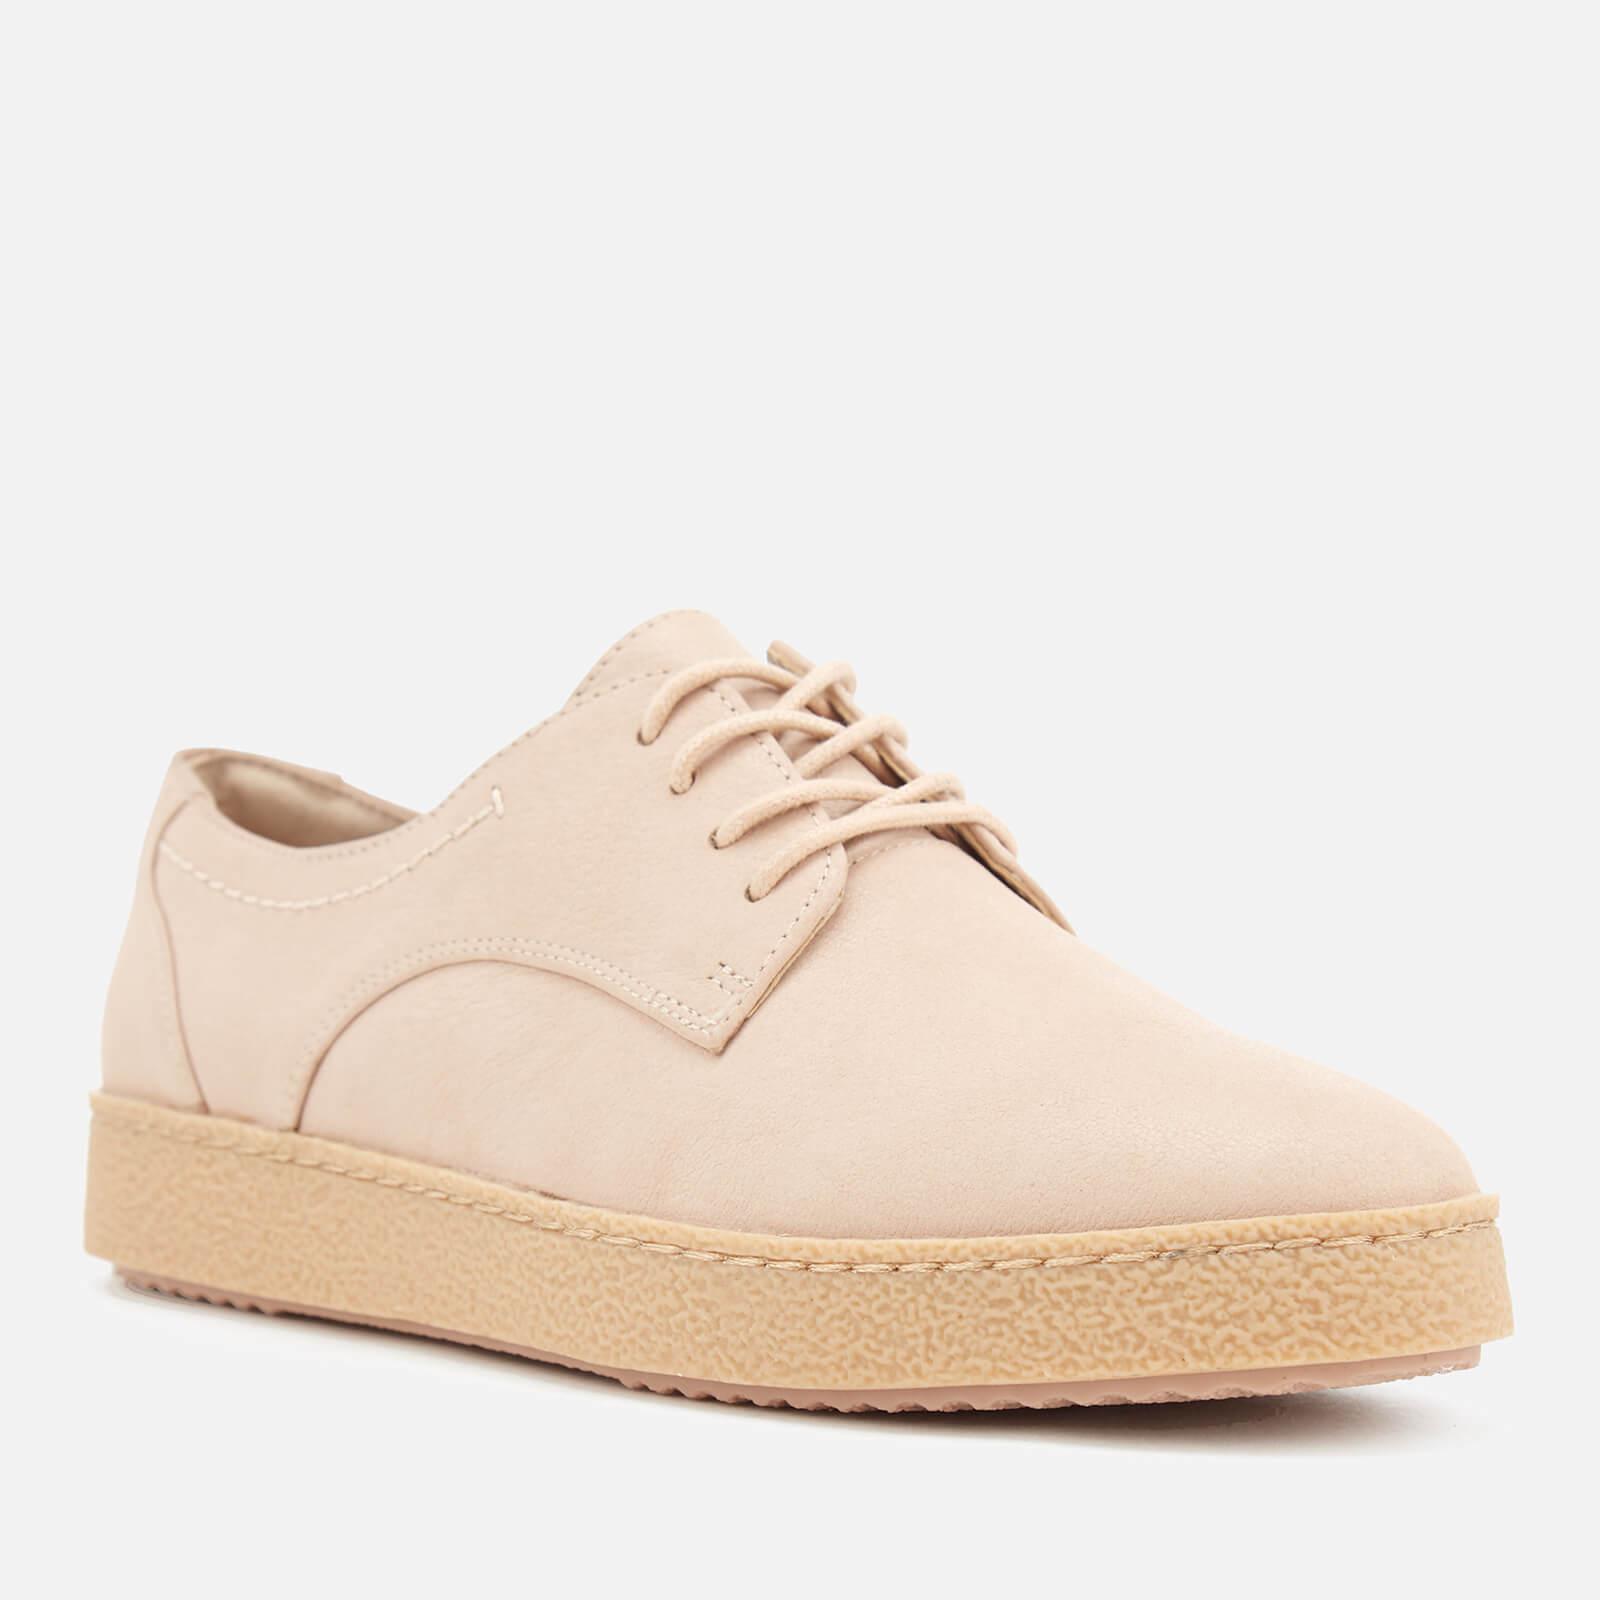 Clarks Lace Lillia Lola Nubuck Derby Shoes in Pink - Lyst